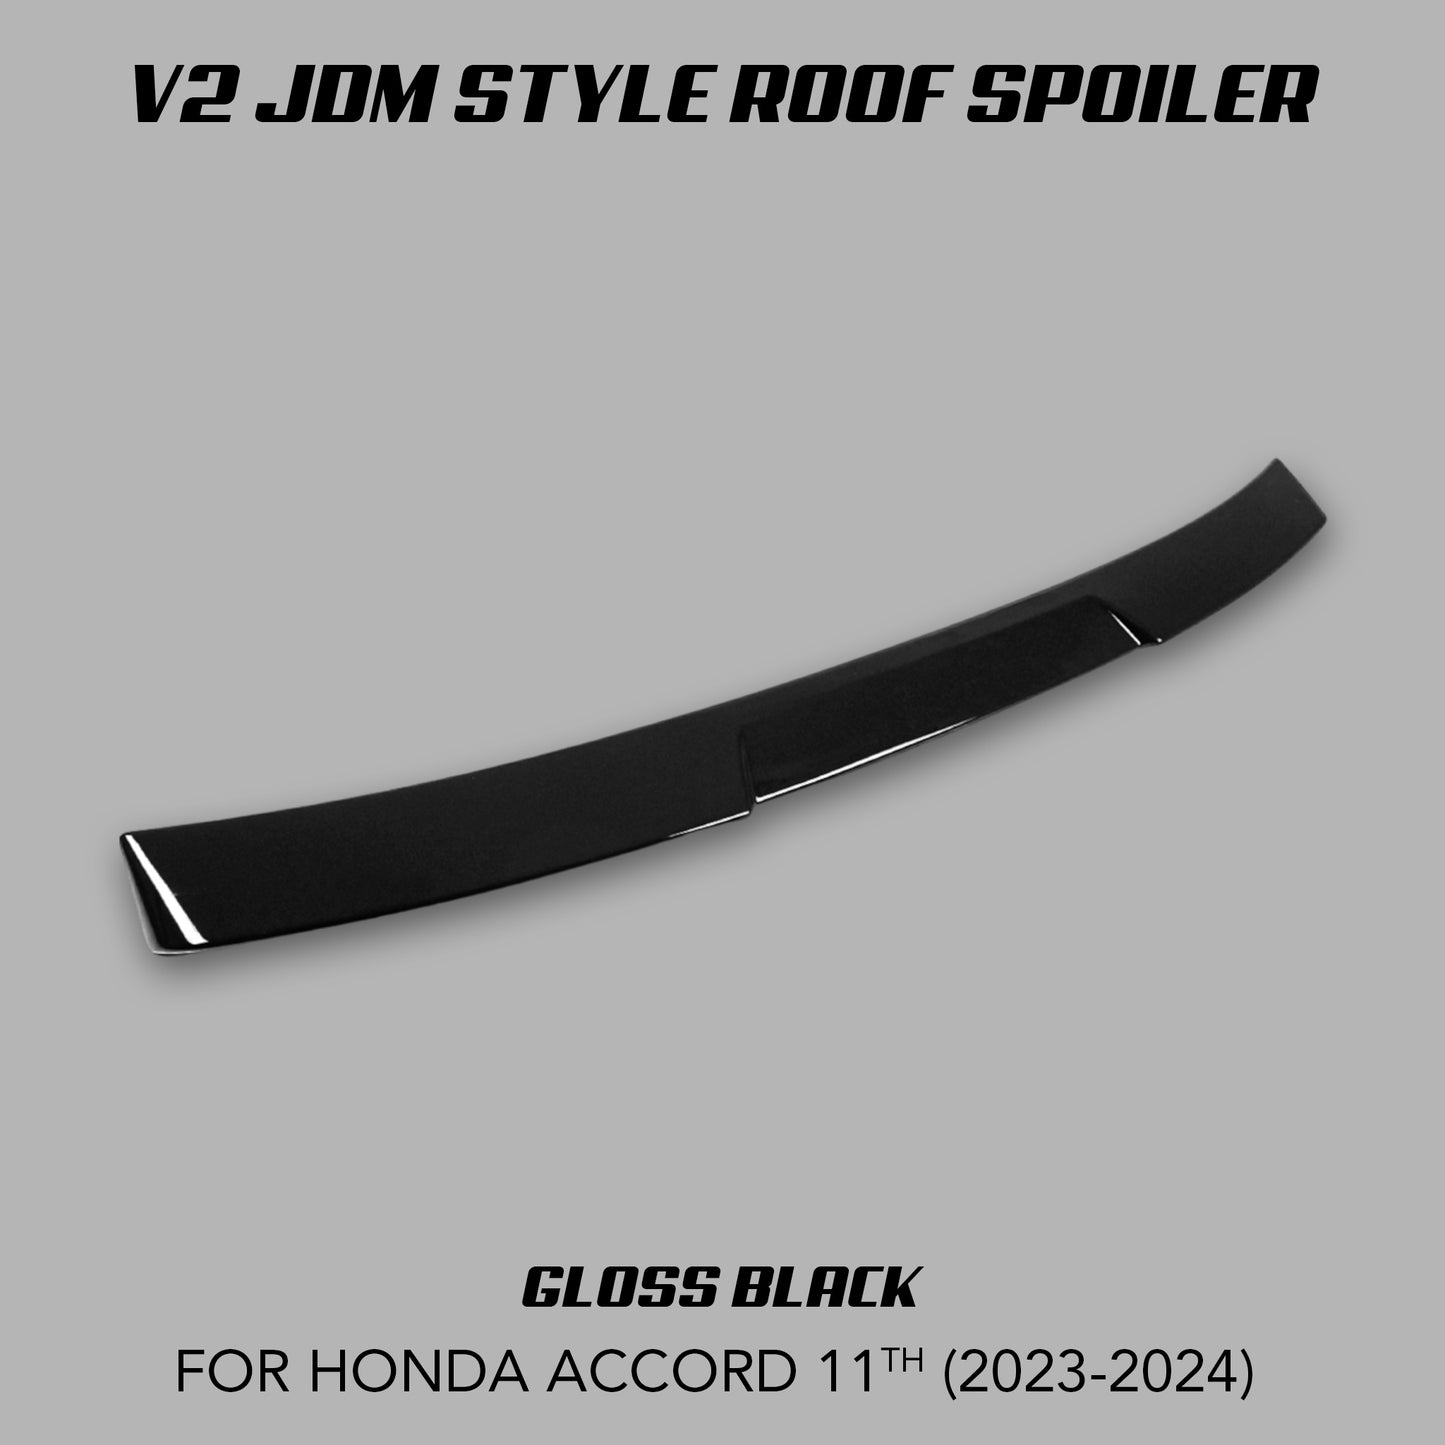 [ACCORD 11TH] JDM STYLE ROOF SPOILER V2